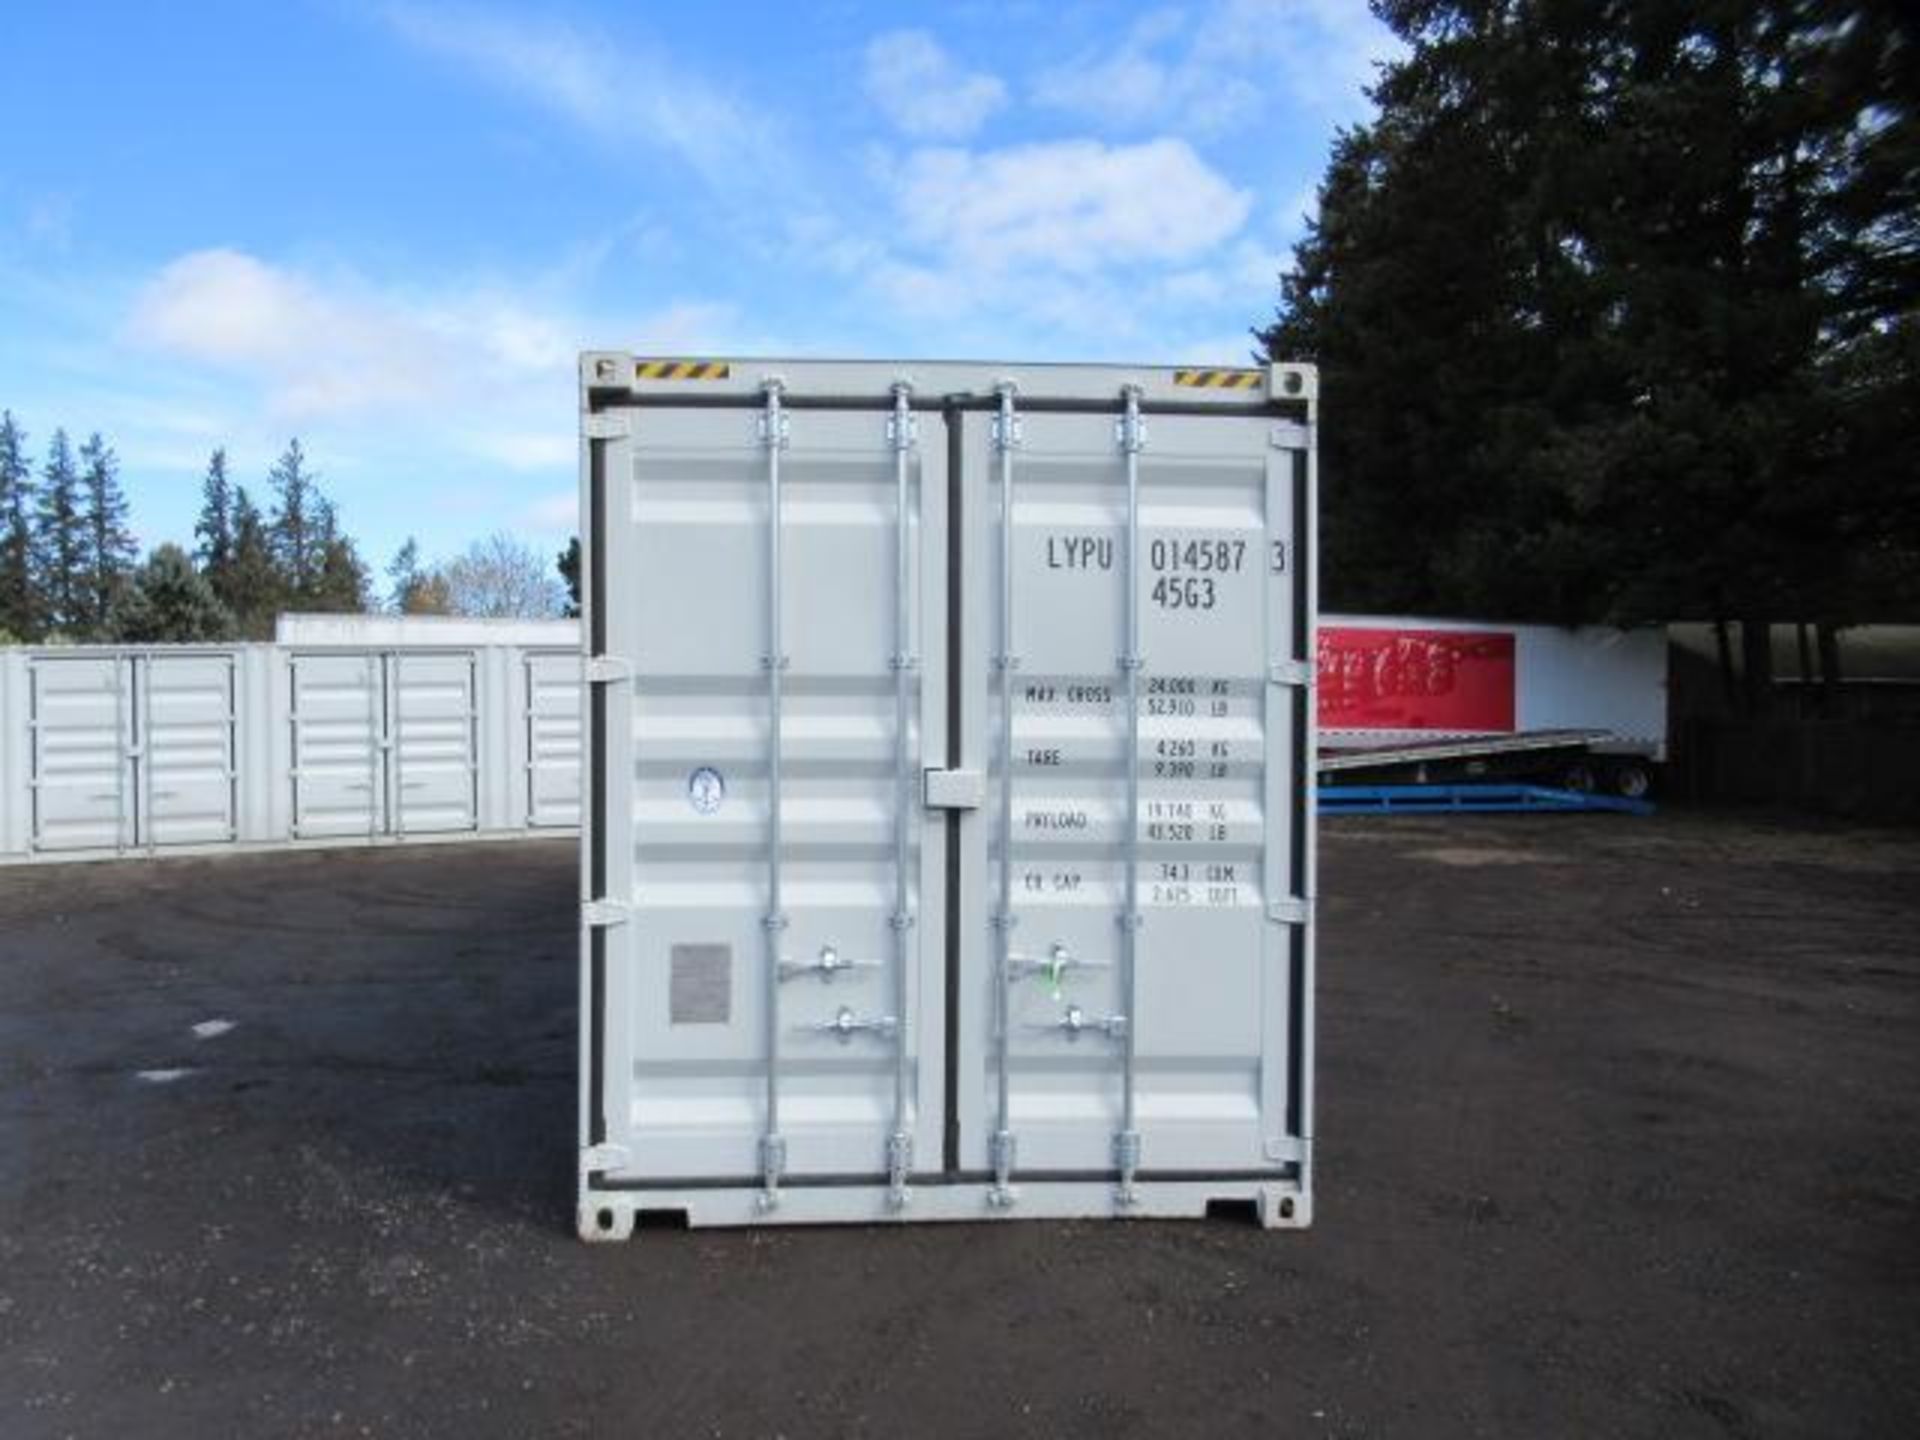 2024 40' HIGH CUBE SHIPPING CONTAINER W/ (4) SIDE DOORS, SER#: LYPU0145873 (UNUSED) - Image 4 of 6